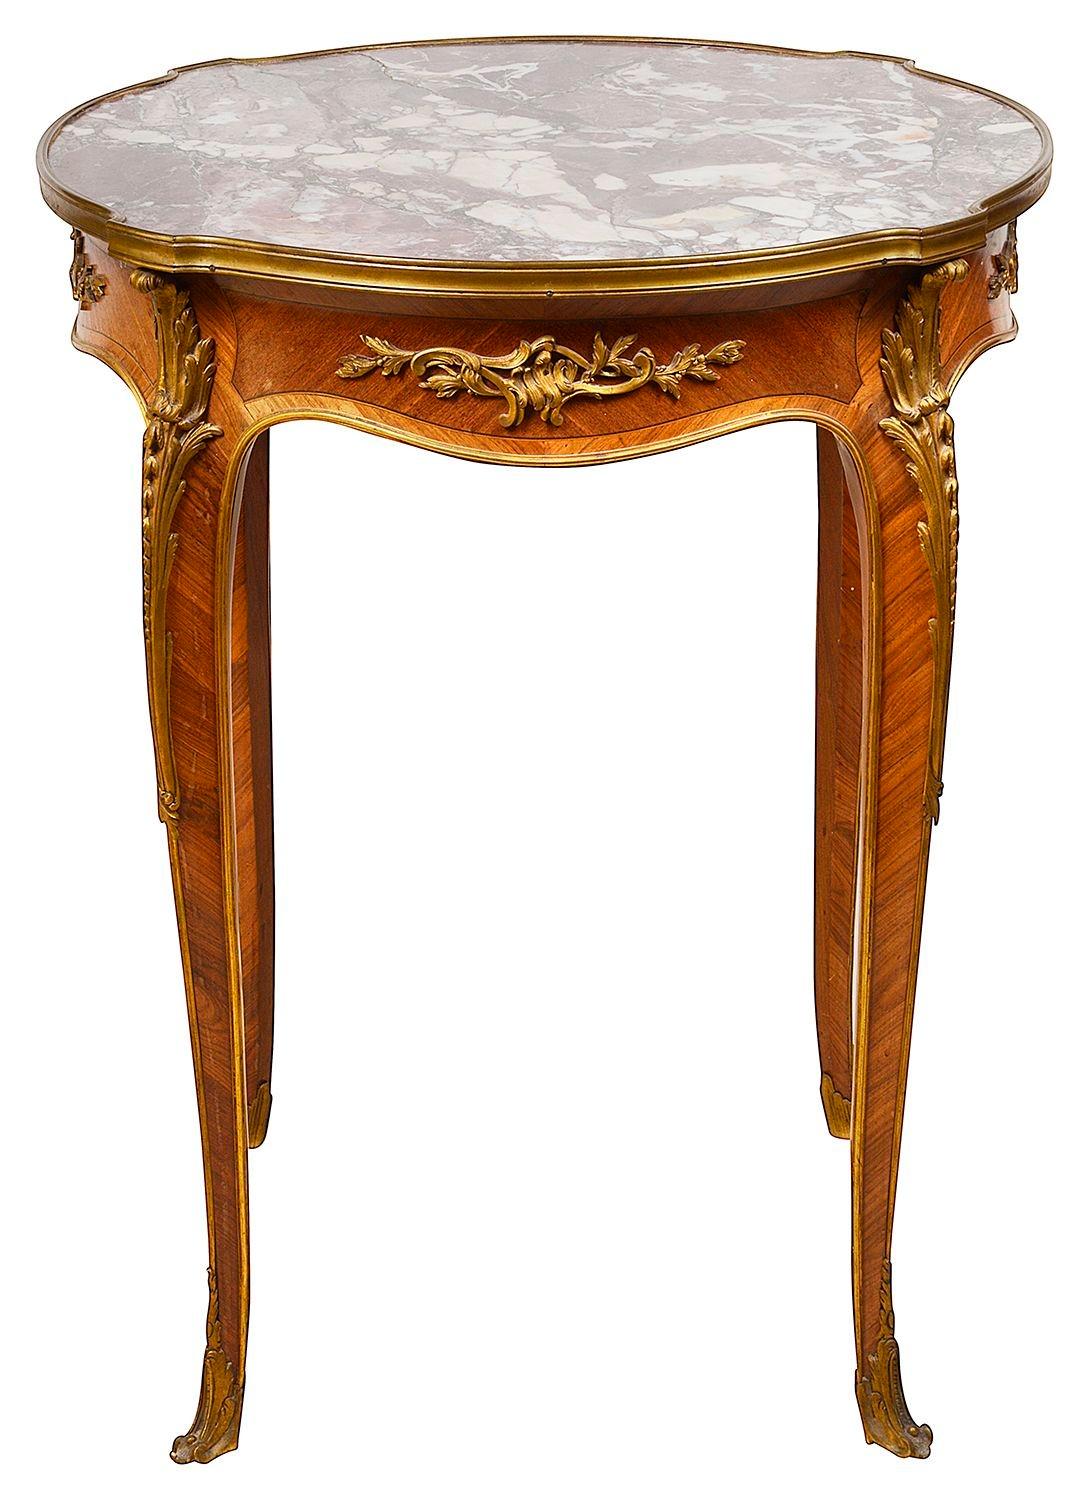 A fine quality late 19th century French rouge marble topped, Geridon, attributed to Francoise Linke.
Having wonderful gilded ormolu scrolling foliate mounts and moulding, an inset rouge marble top and raised on elegant cabriole legs, terminating in